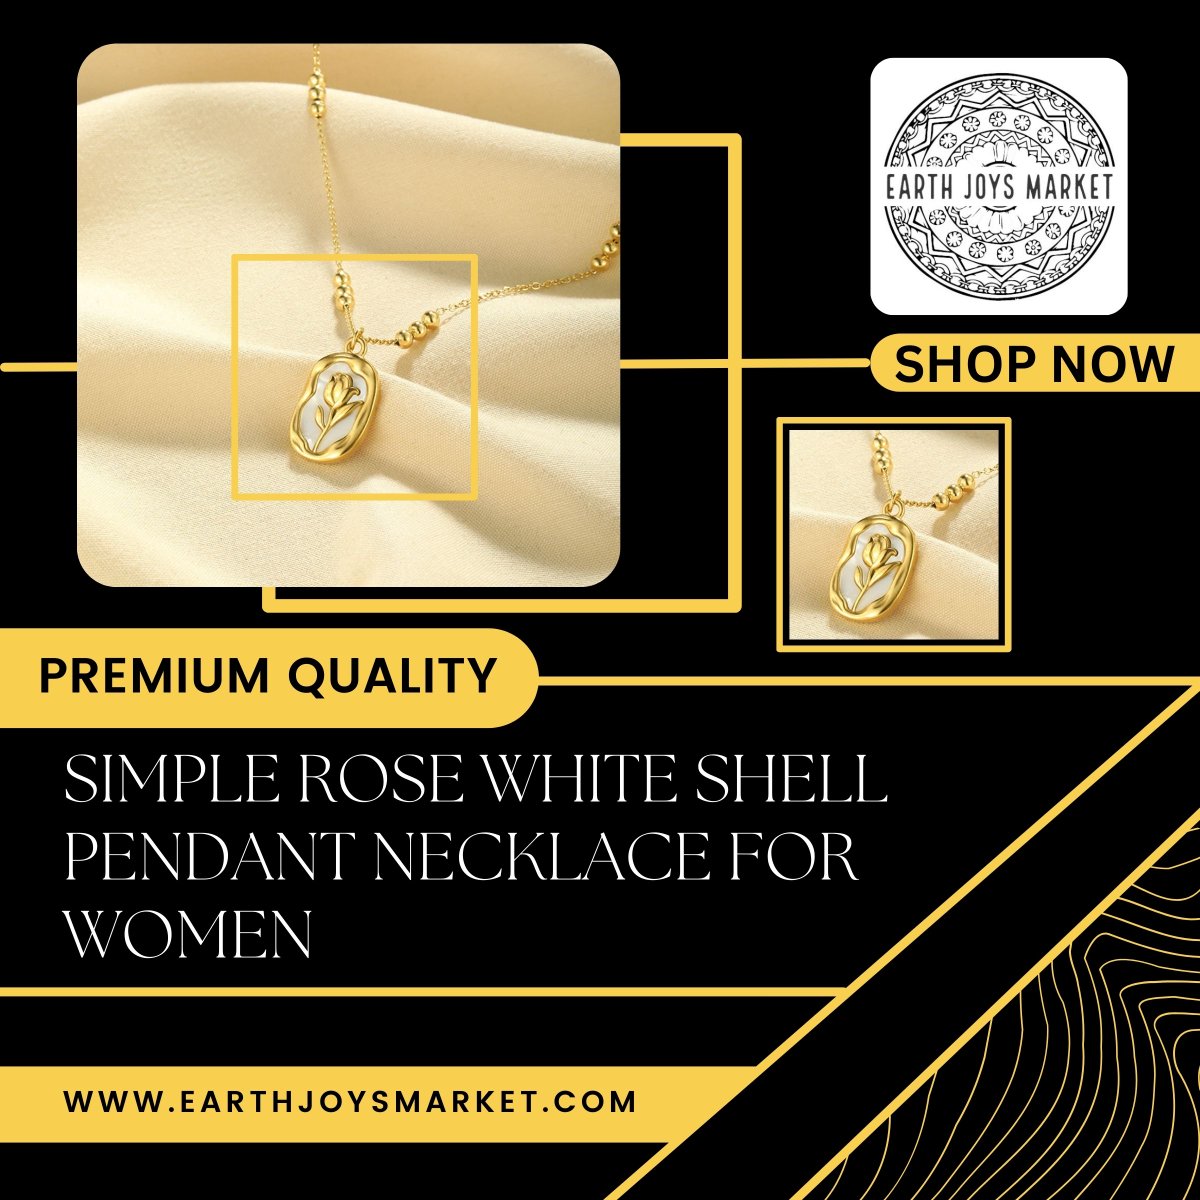 'Discover Elegance: Simple Rose White Shell Pendant Necklace at Earth Joys Market!' Shop Now: ➡ earthjoysmarket.com/product/simple… #Jewelry #Necklace #TopNecklaceCollection #LuxuryJewelry #FineJewels #EarthJoysMarket #amazon #amazonfinds #alibaba #alibabastock #aliexpress